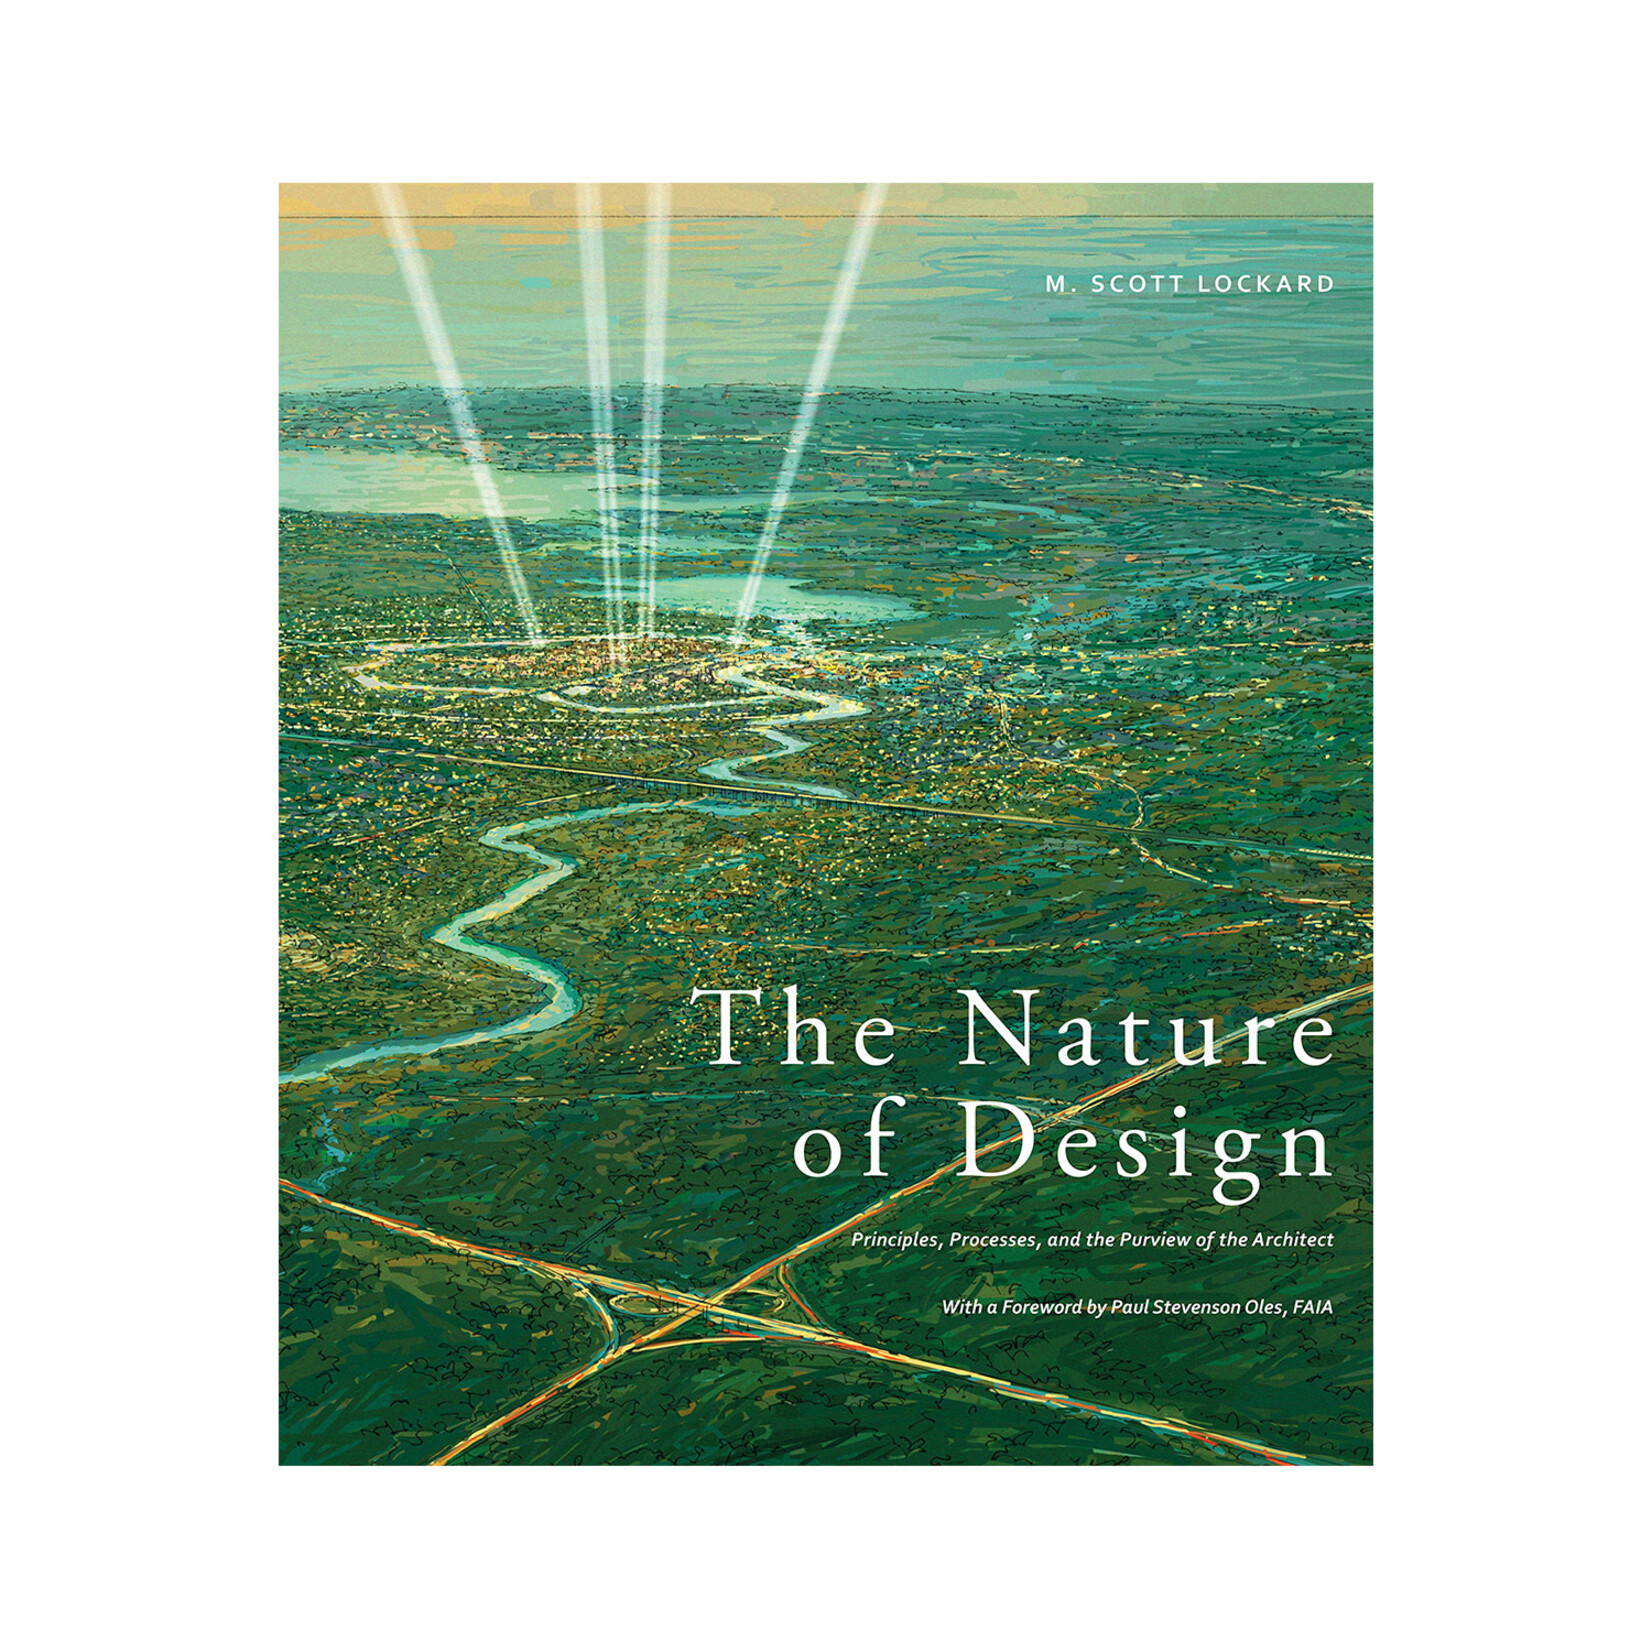 The Nature of Design: Principles, Processes, and the Purview of the Architect